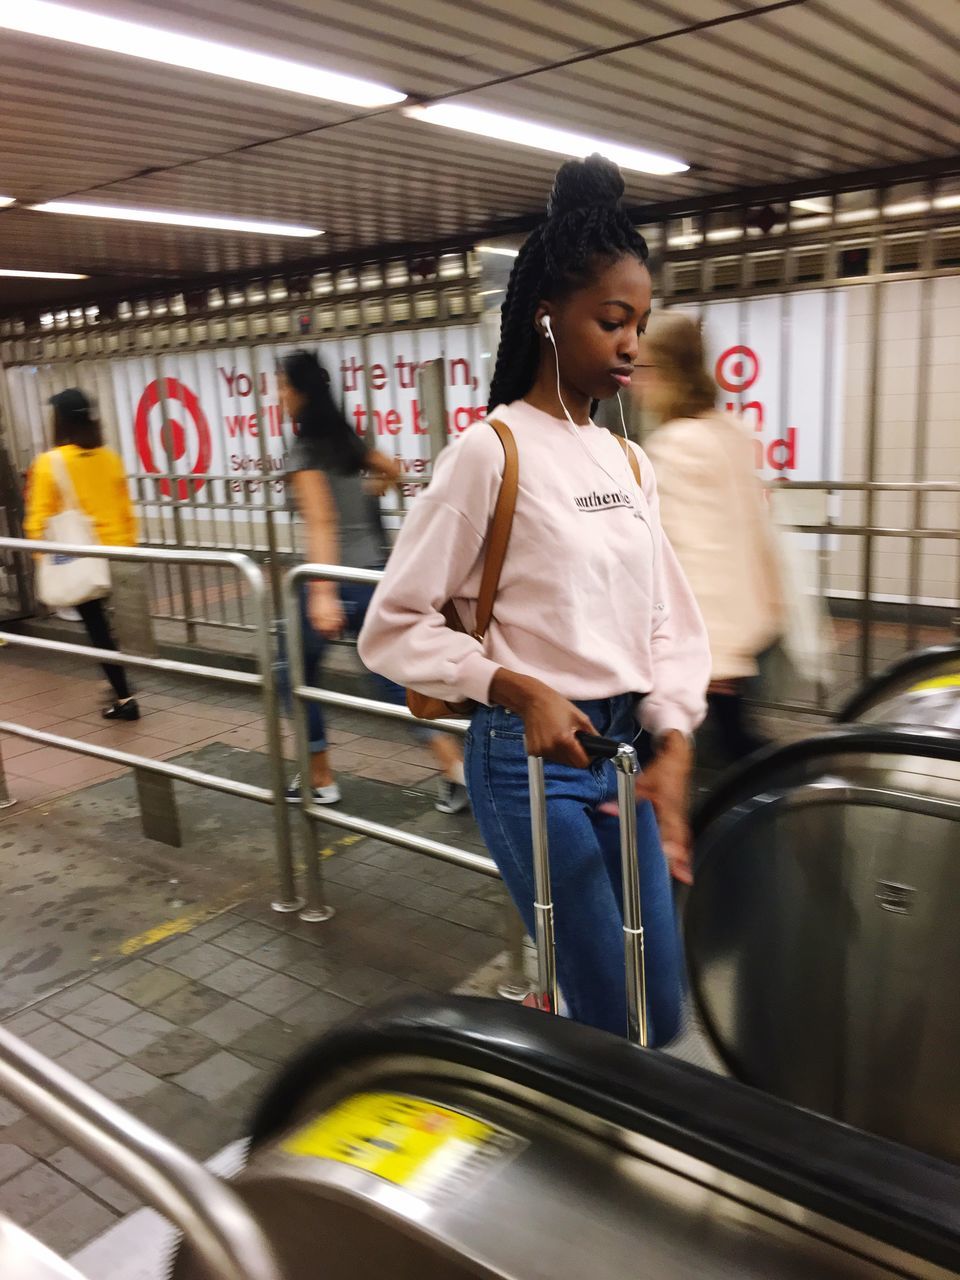 real people, one person, transportation, women, mode of transportation, lifestyles, casual clothing, indoors, three quarter length, blurred motion, motion, public transportation, land vehicle, standing, leisure activity, adult, architecture, looking, hairstyle